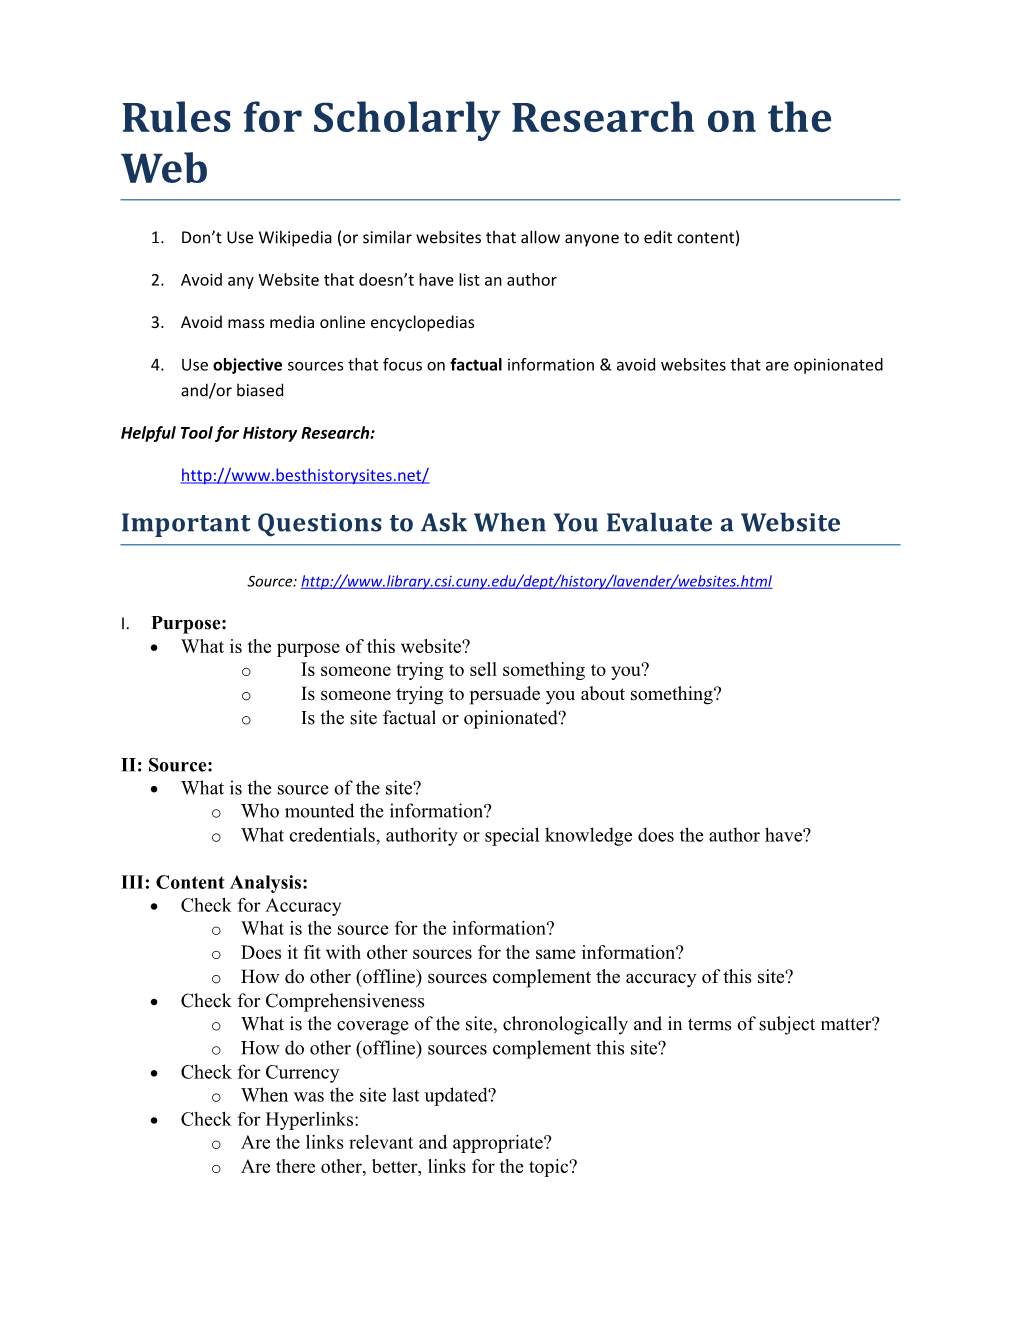 Rules for Scholarly Research on the Web